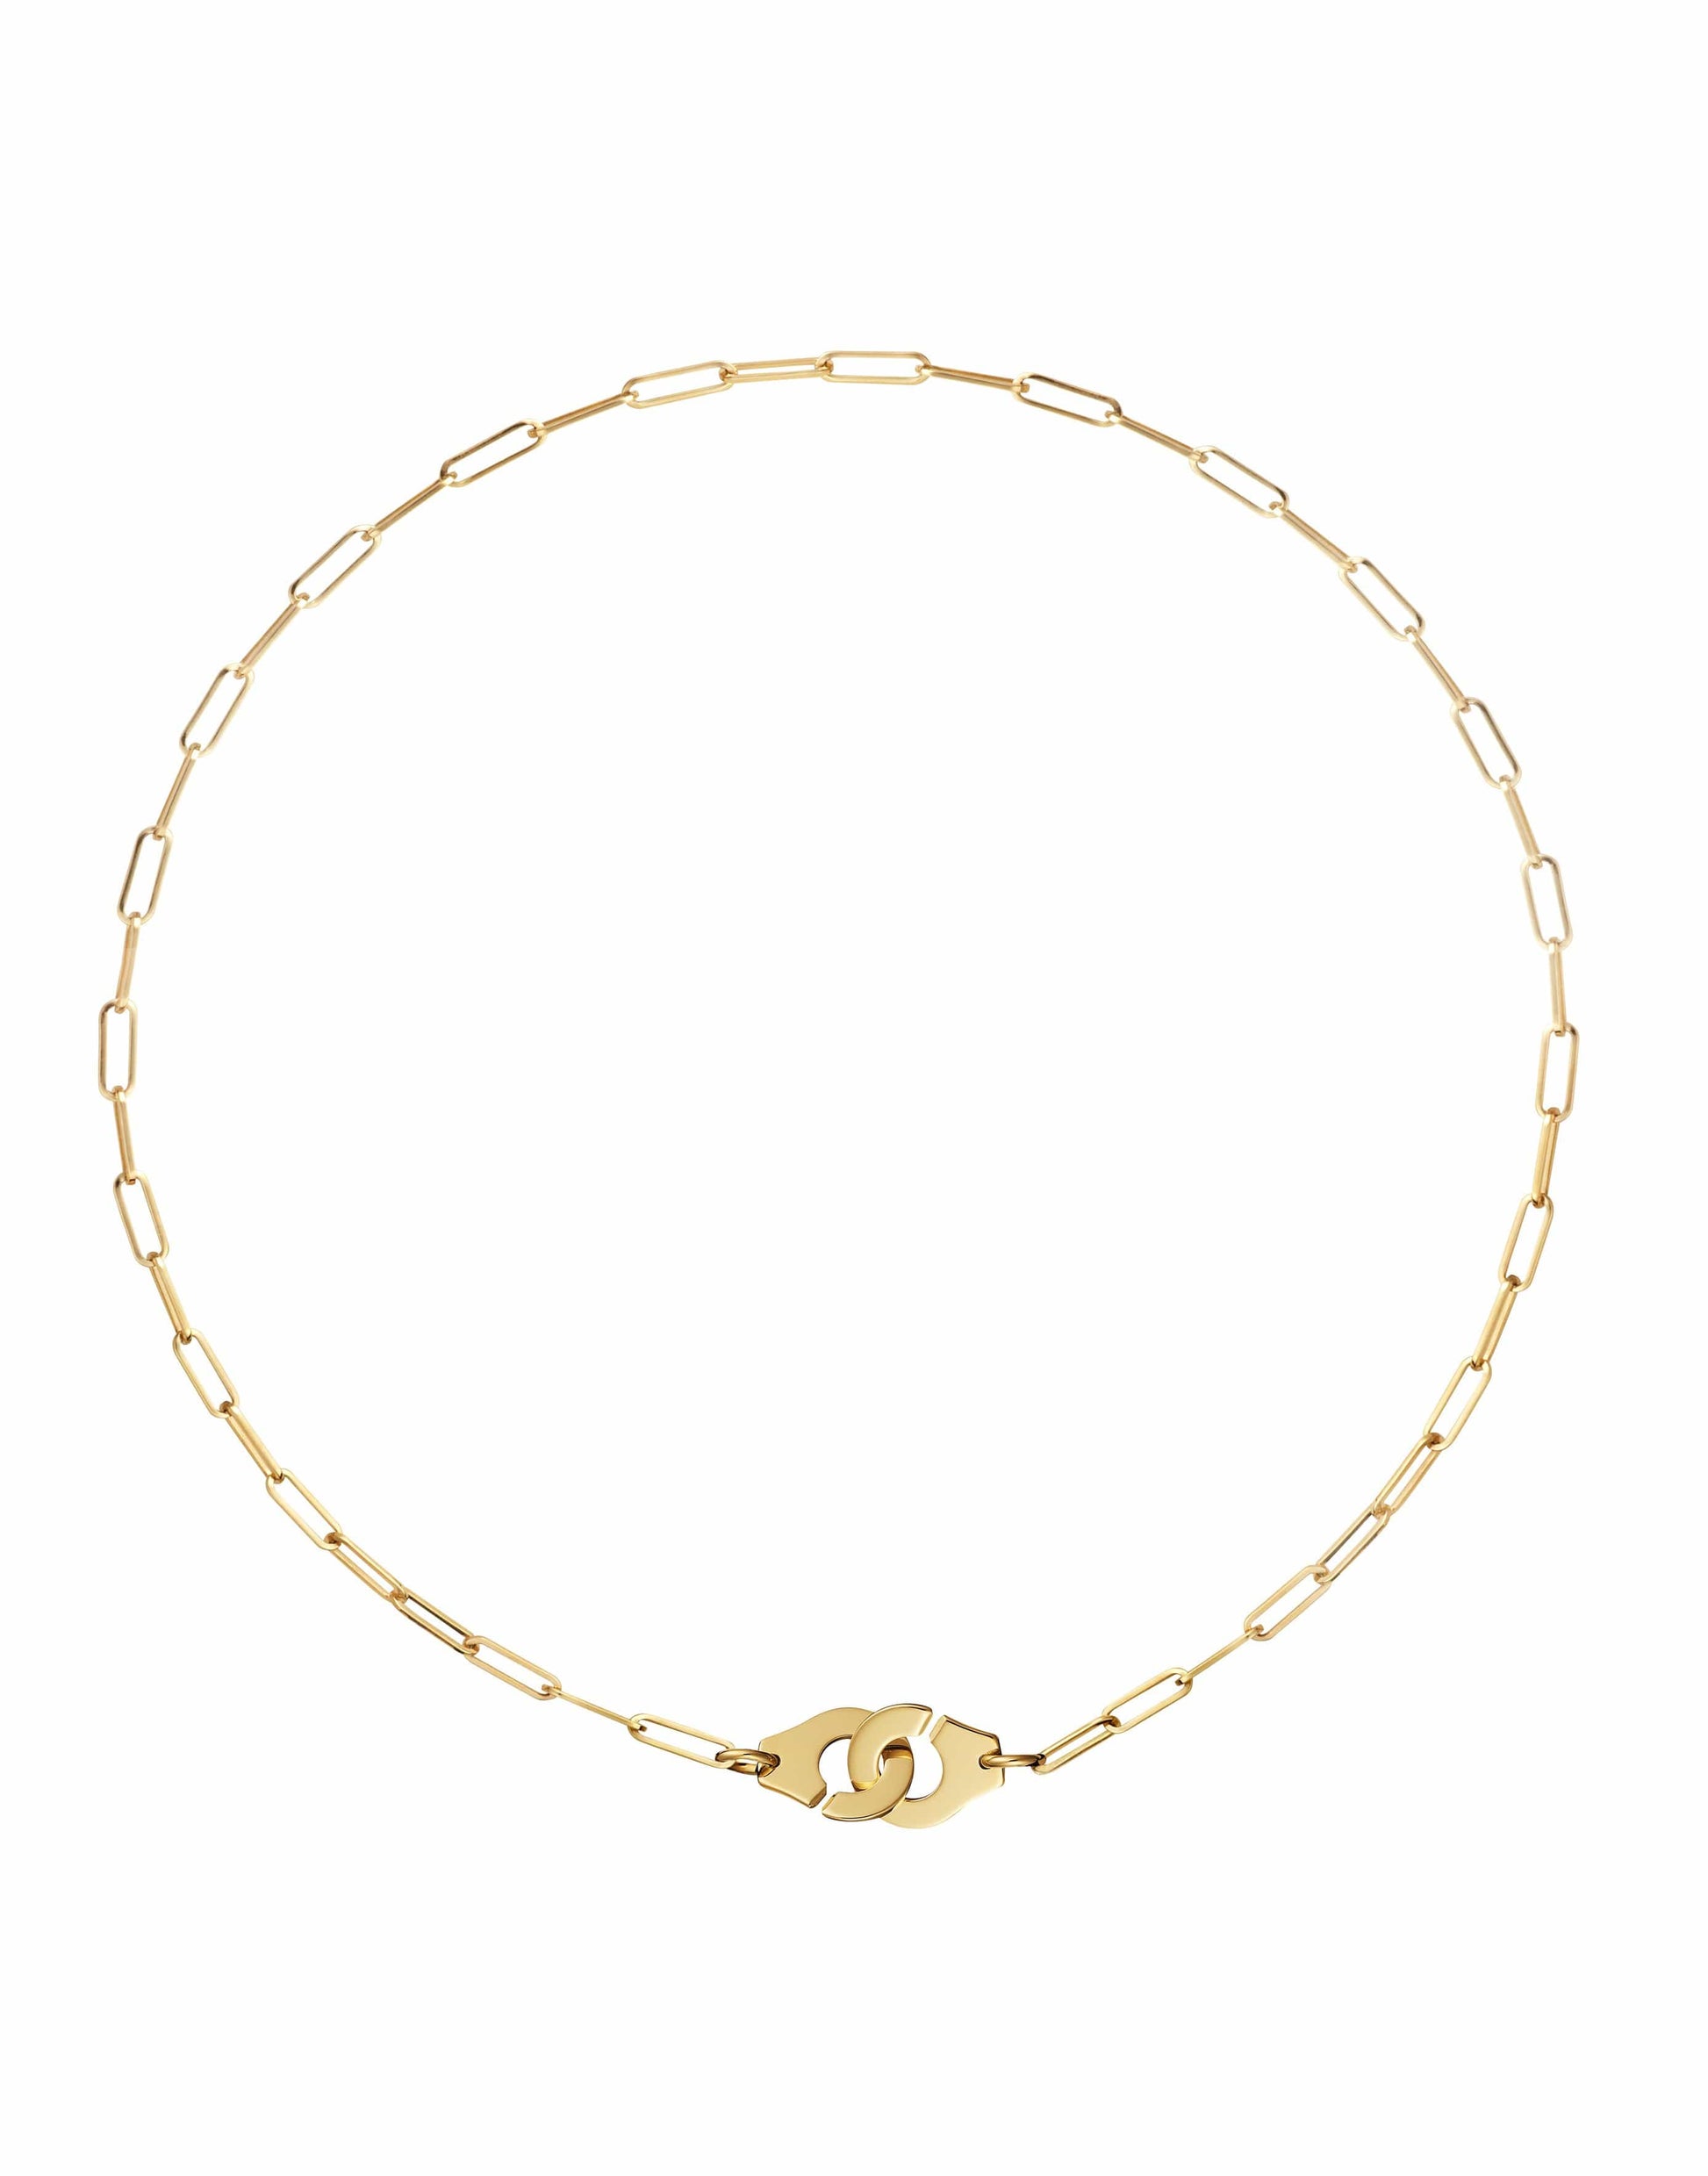 DINH VAN-Menottes R10 Chain Necklace-YELLOW GOLD